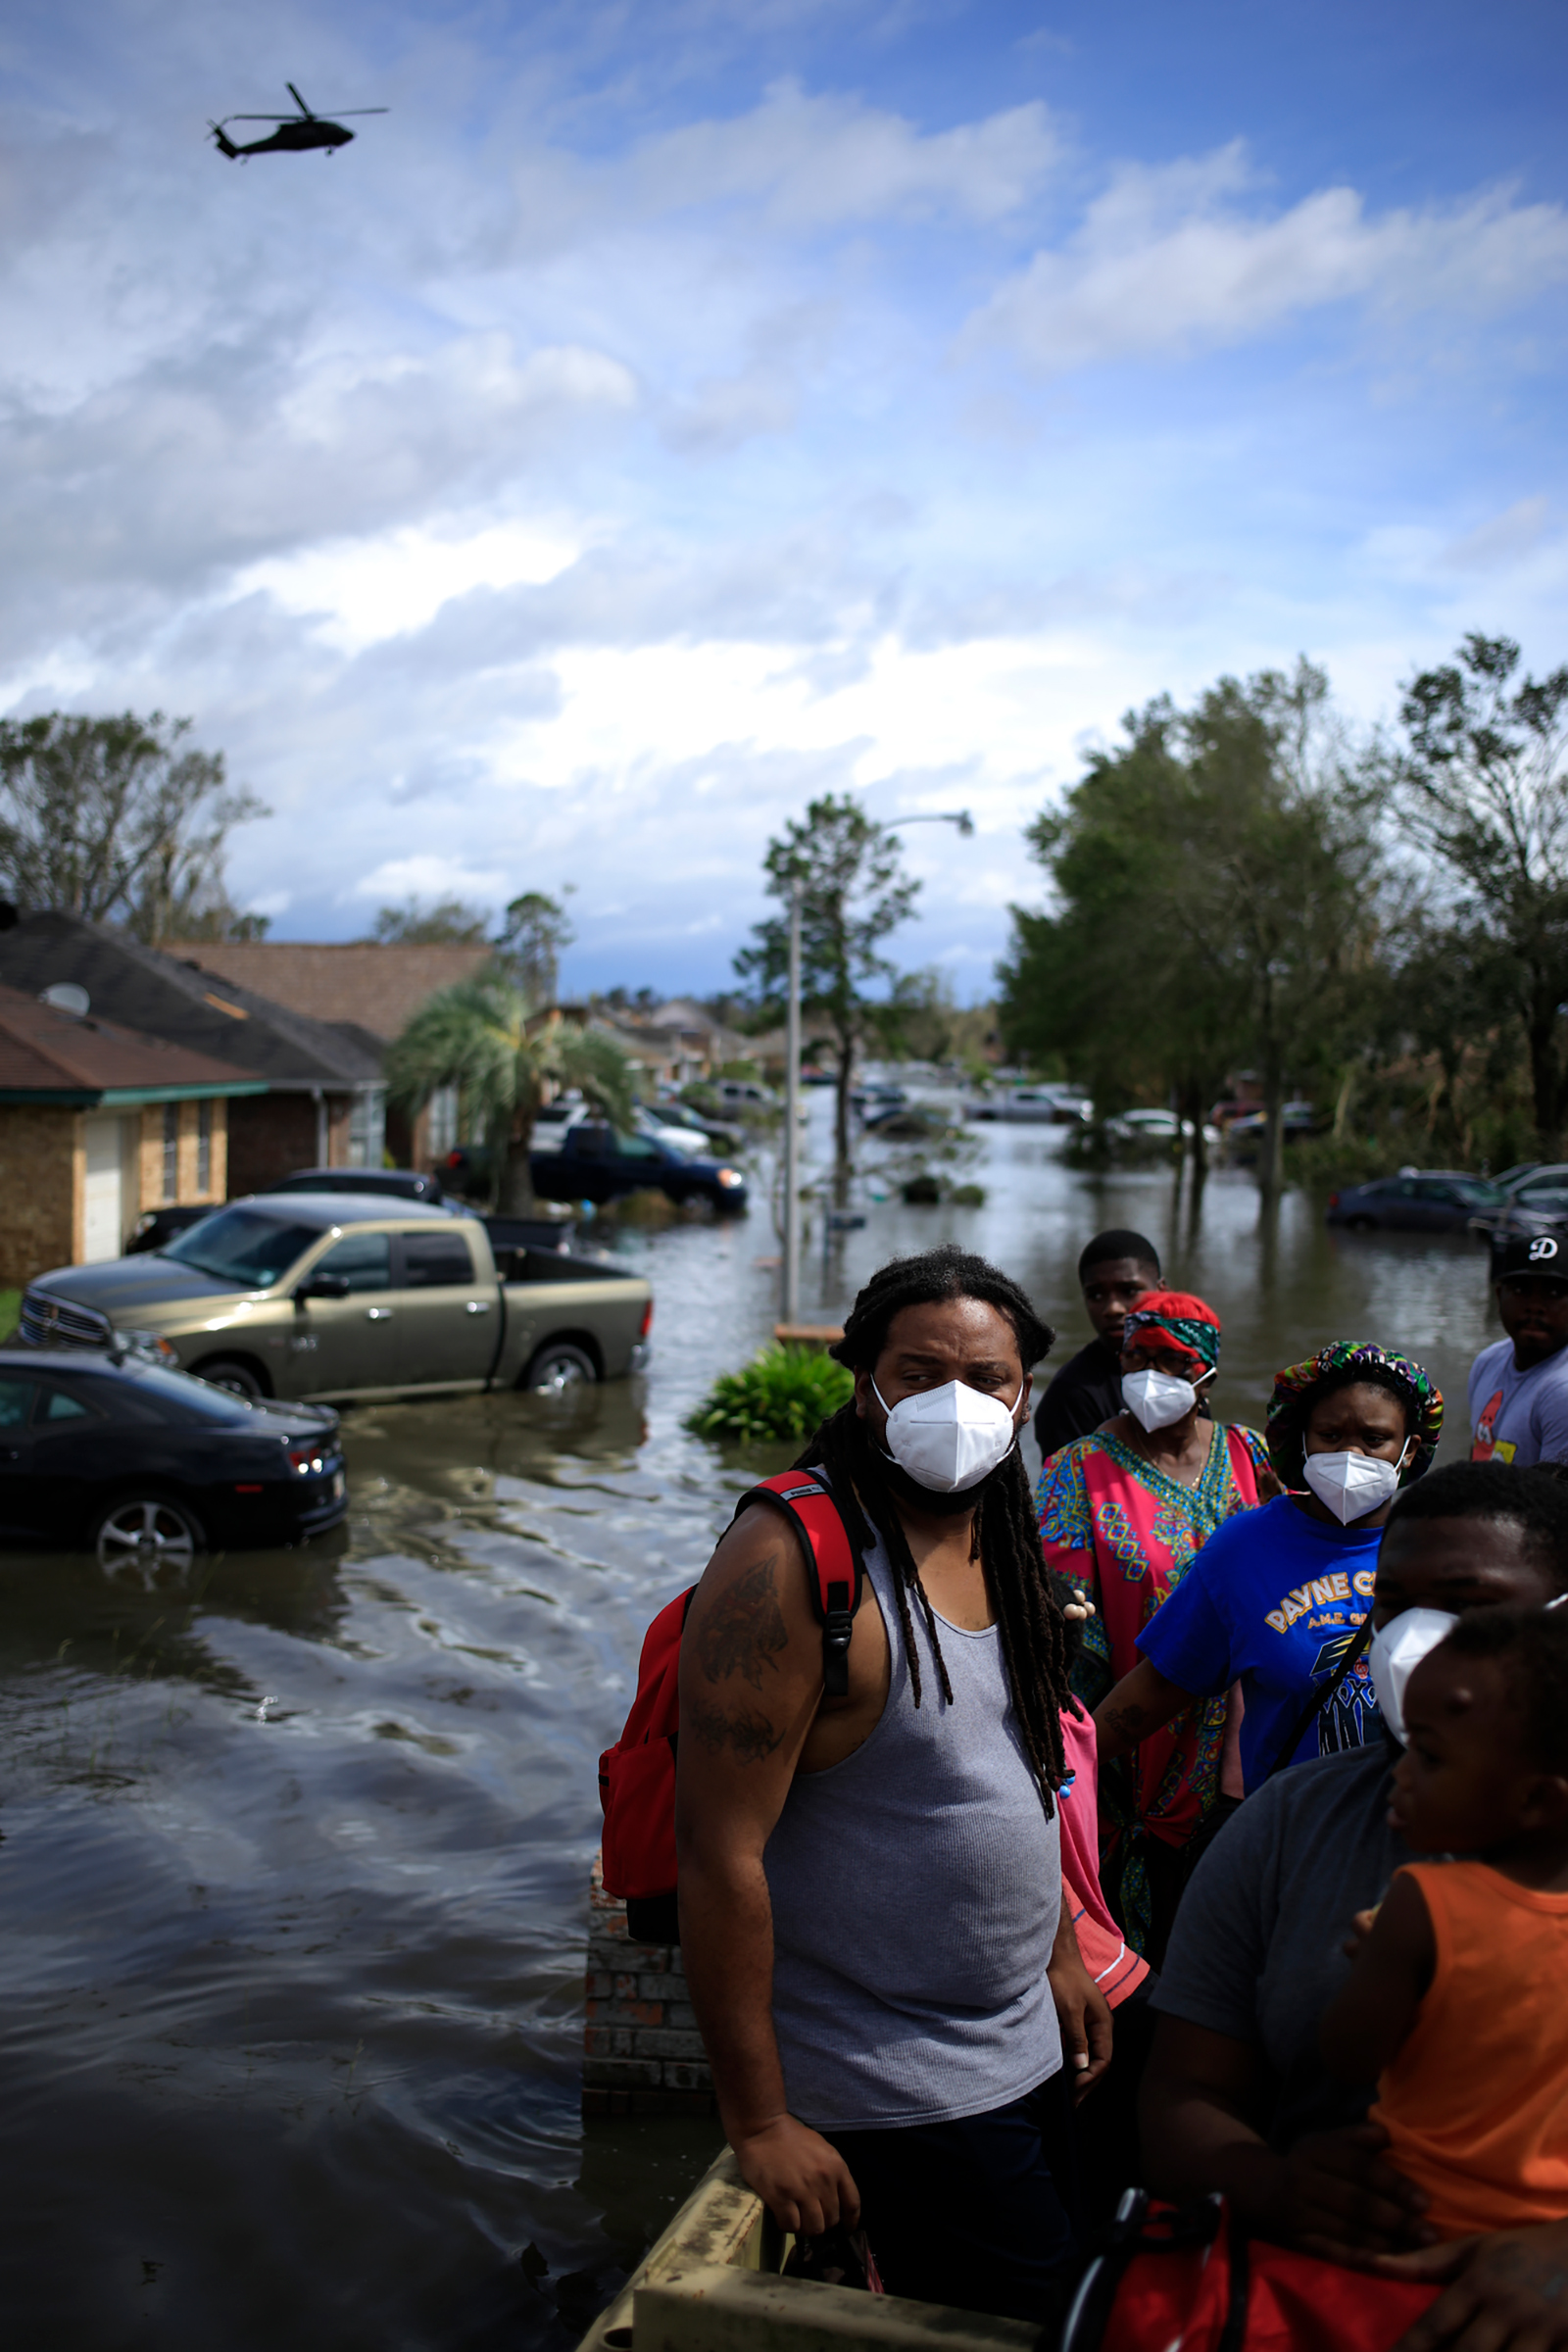 Residents ride in a high water vehicle after being rescued from floodwater left behind by Hurricane Ida in LaPlace, La. on Aug. 30. (Luke Sharrett—Bloomberg/Getty Images)